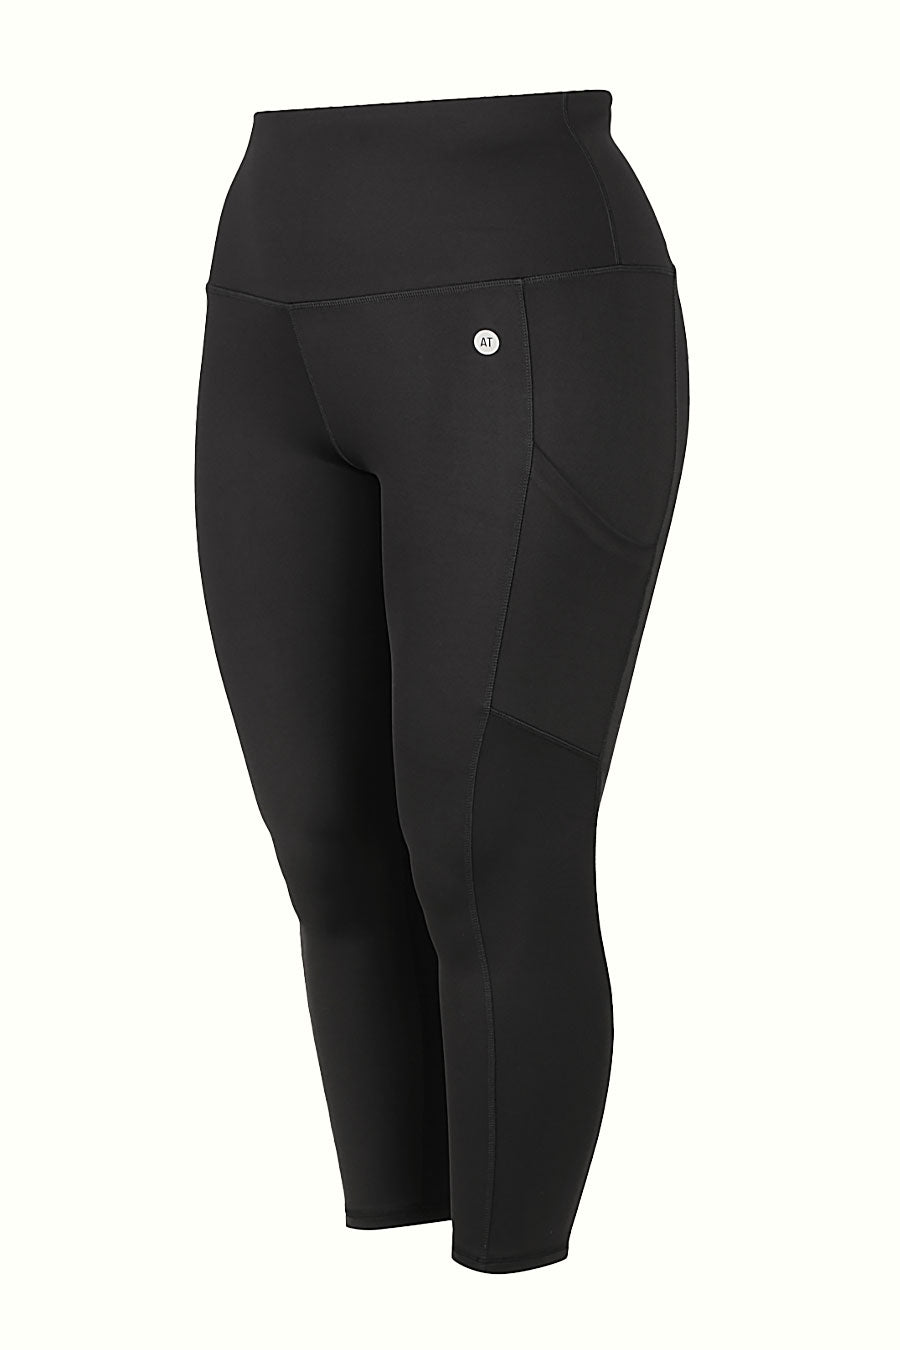 Smart Pocket 7/8 Length Tight - Black from Active Truth™
